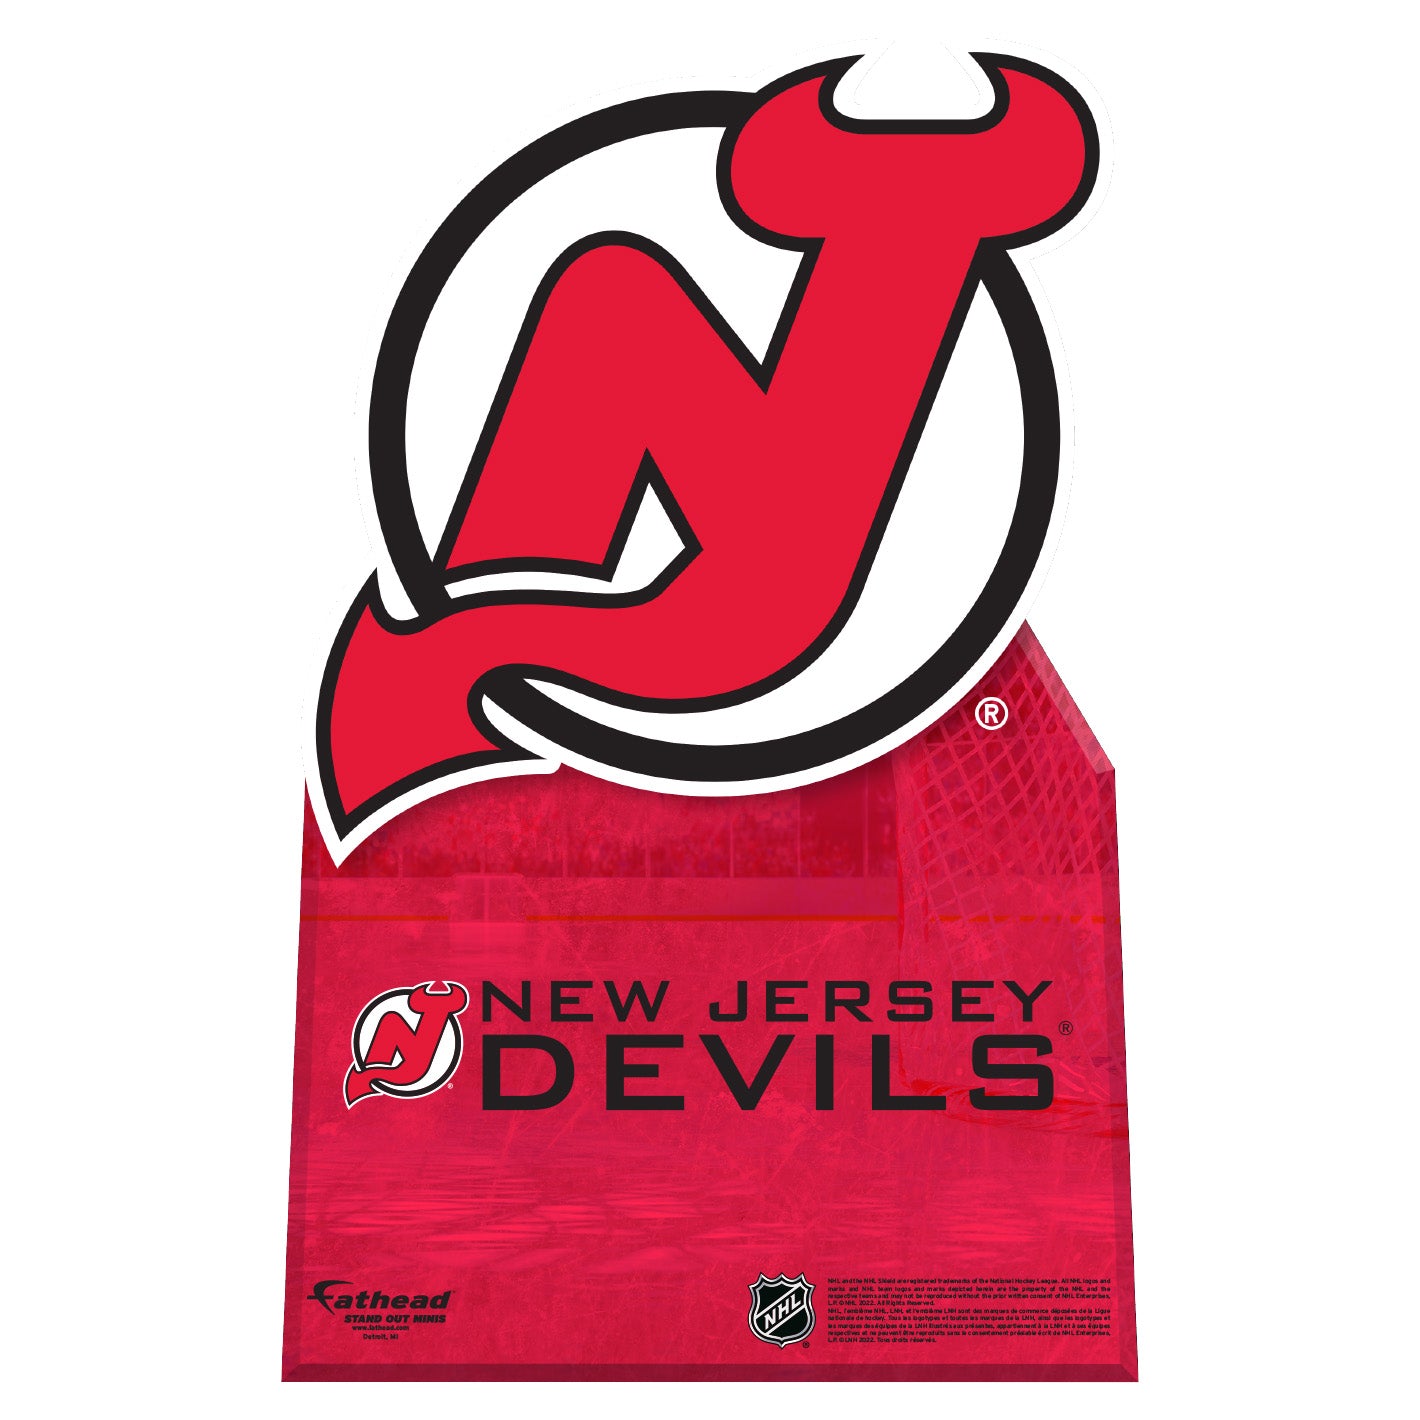 New Jersey Devils: 2022 Outdoor Logo - Officially Licensed NHL